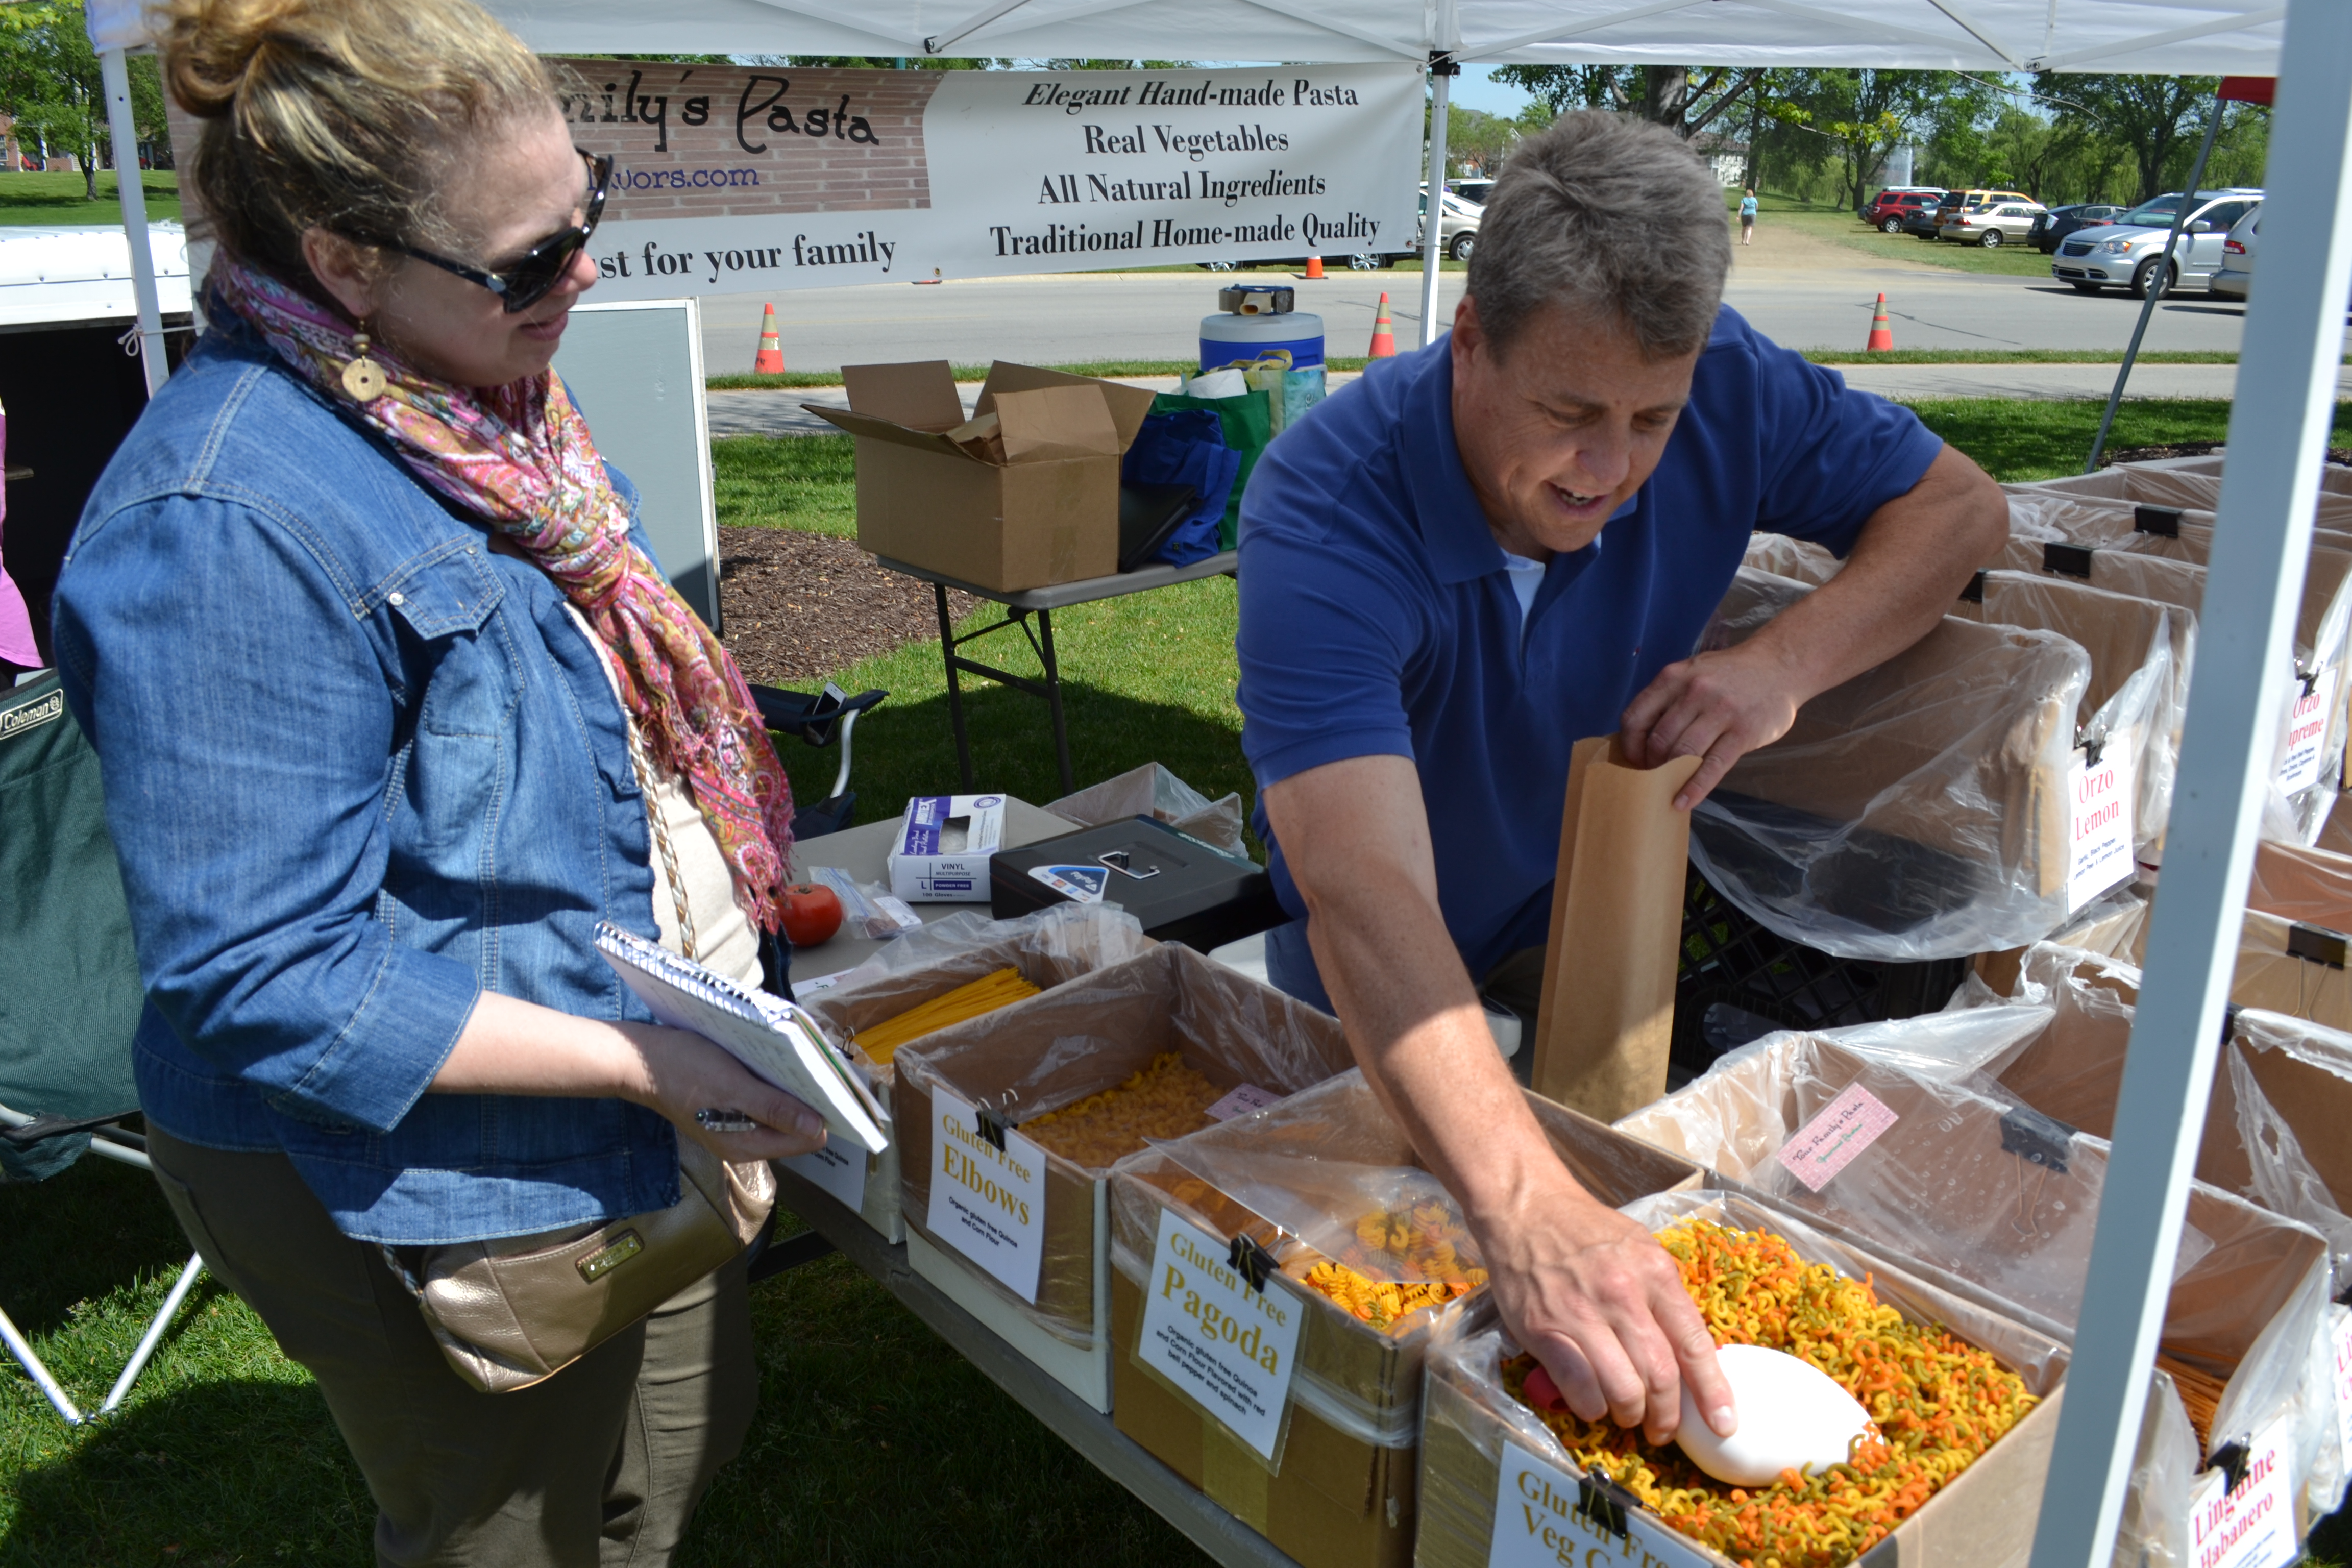 Lori Goldsby checks out fresh pasta at “Your Family’s Pasta” booth with owner Jerry Stevens at Fishers Farmers’ Market. (Photo by John Cinnamon)